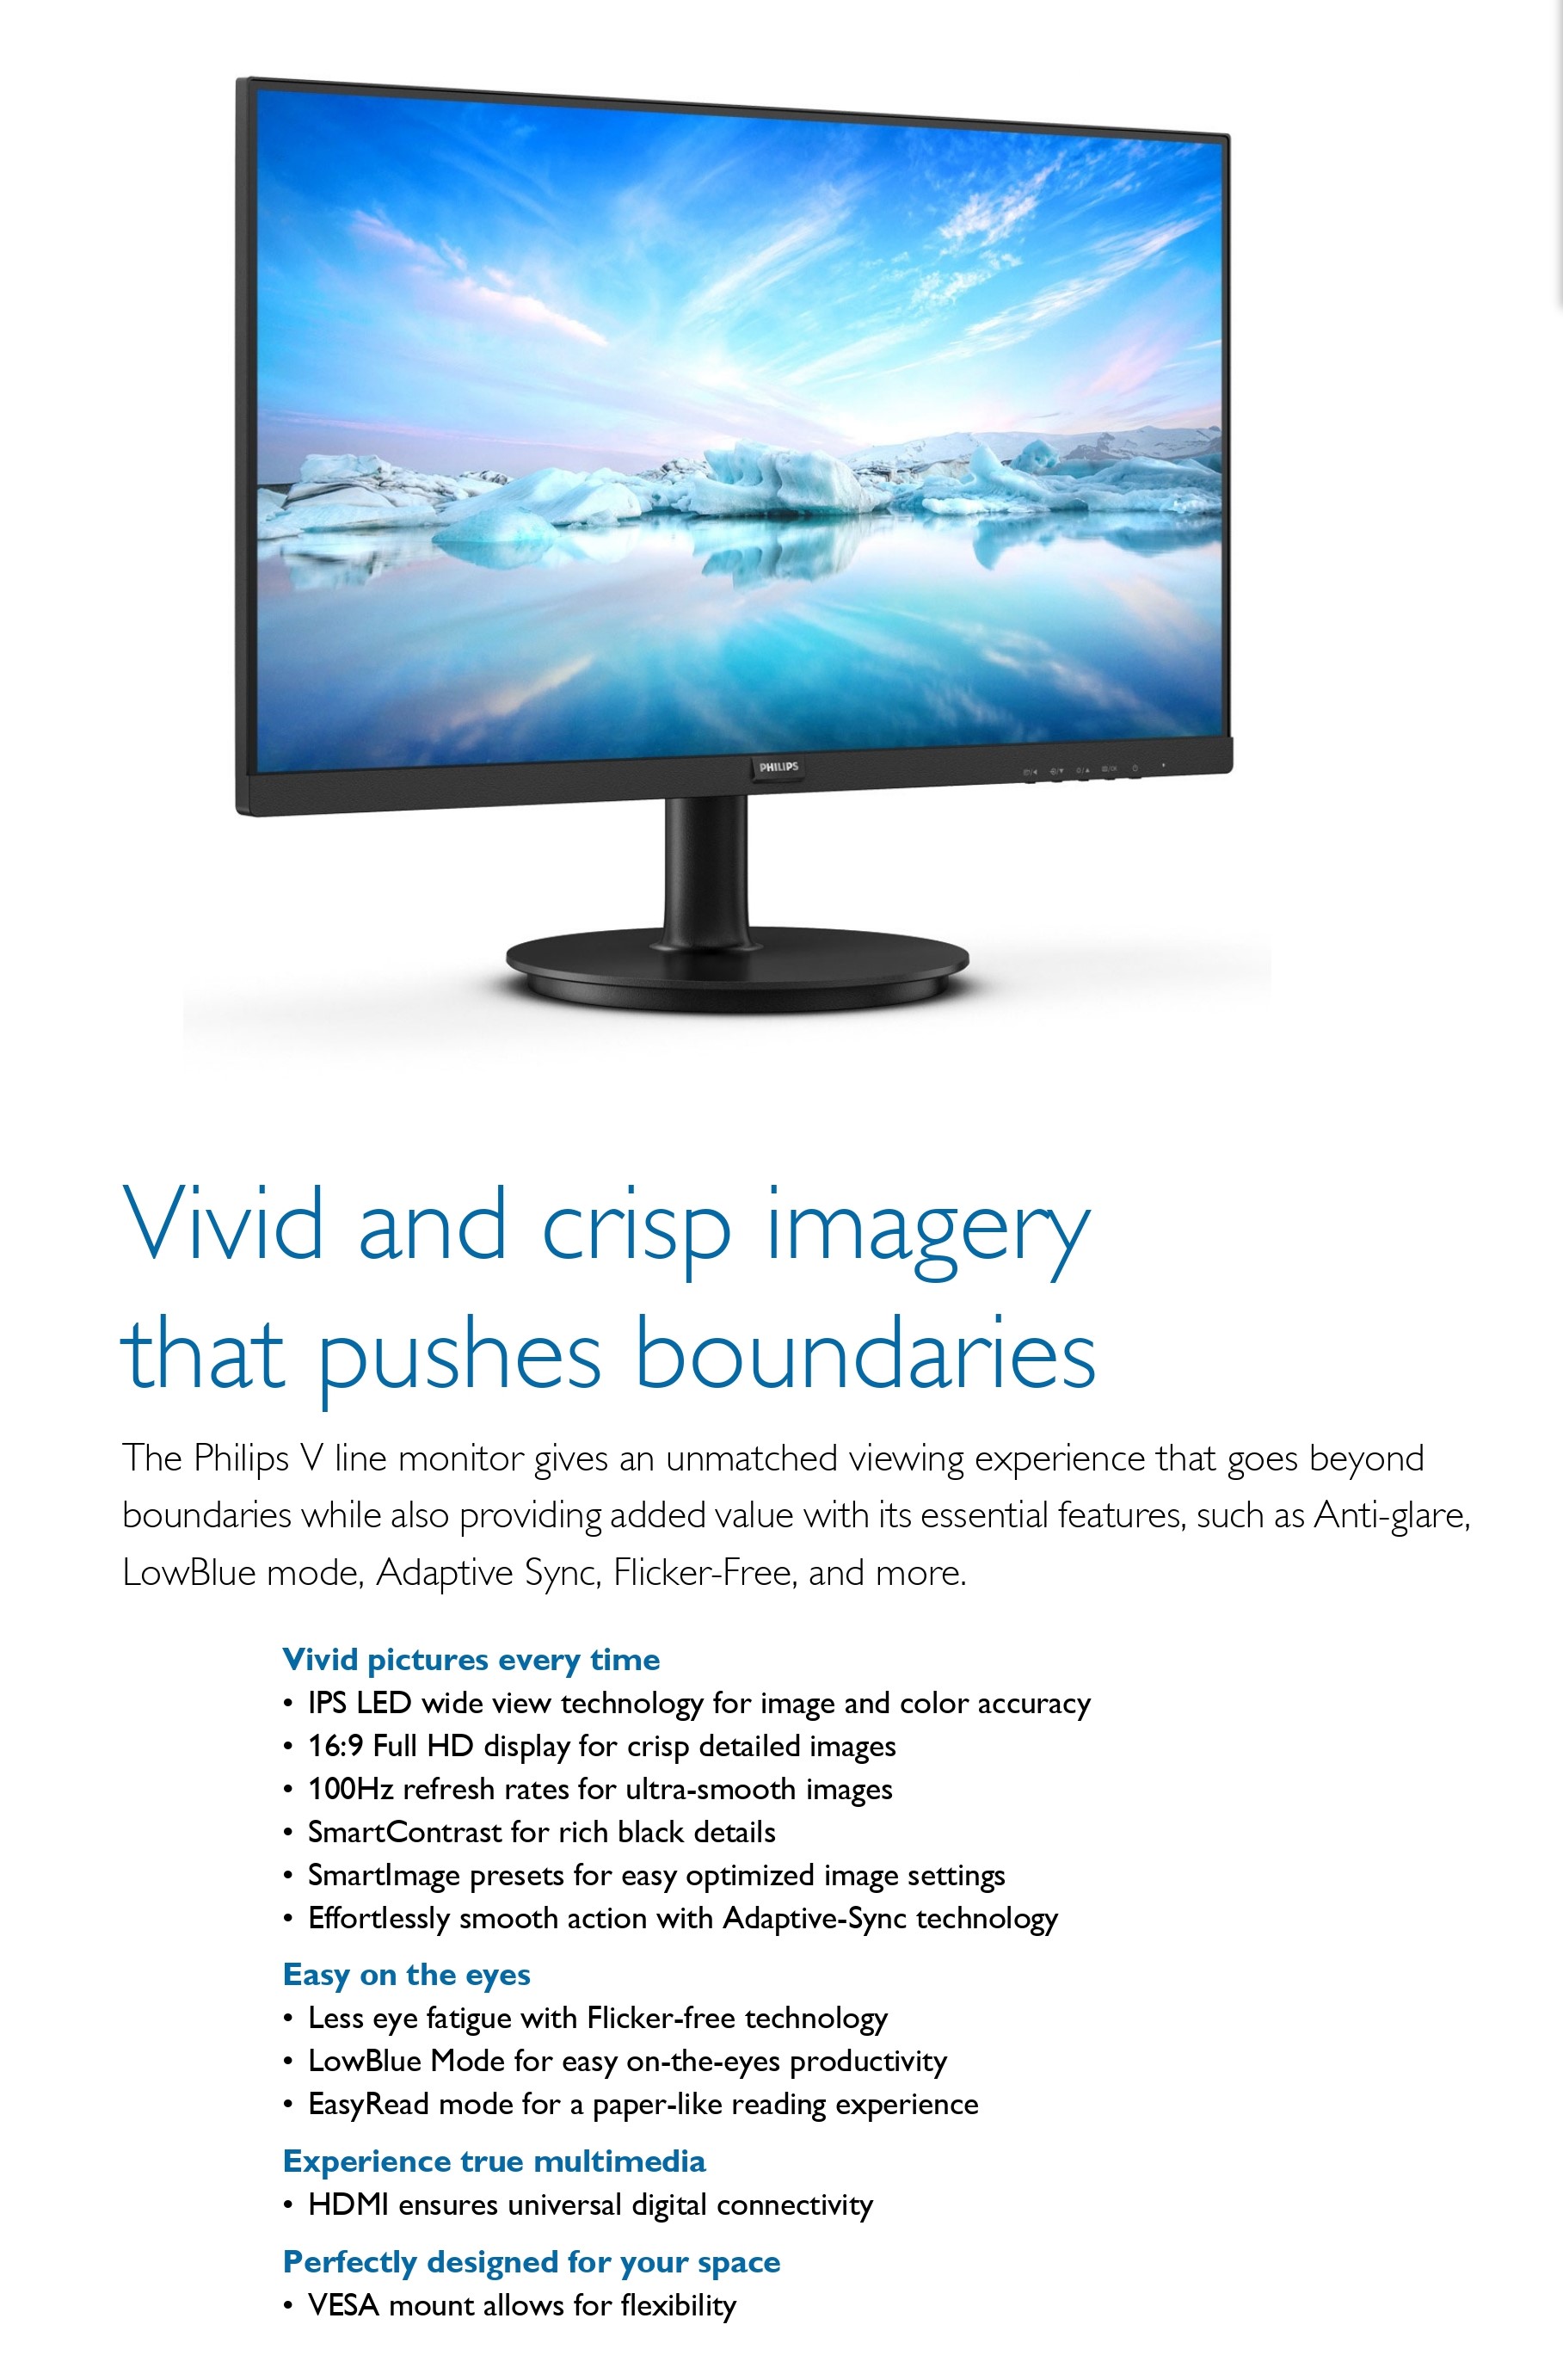 A large marketing image providing additional information about the product Philips 271V8B - 27" FHD 100Hz IPS Monitor - Additional alt info not provided